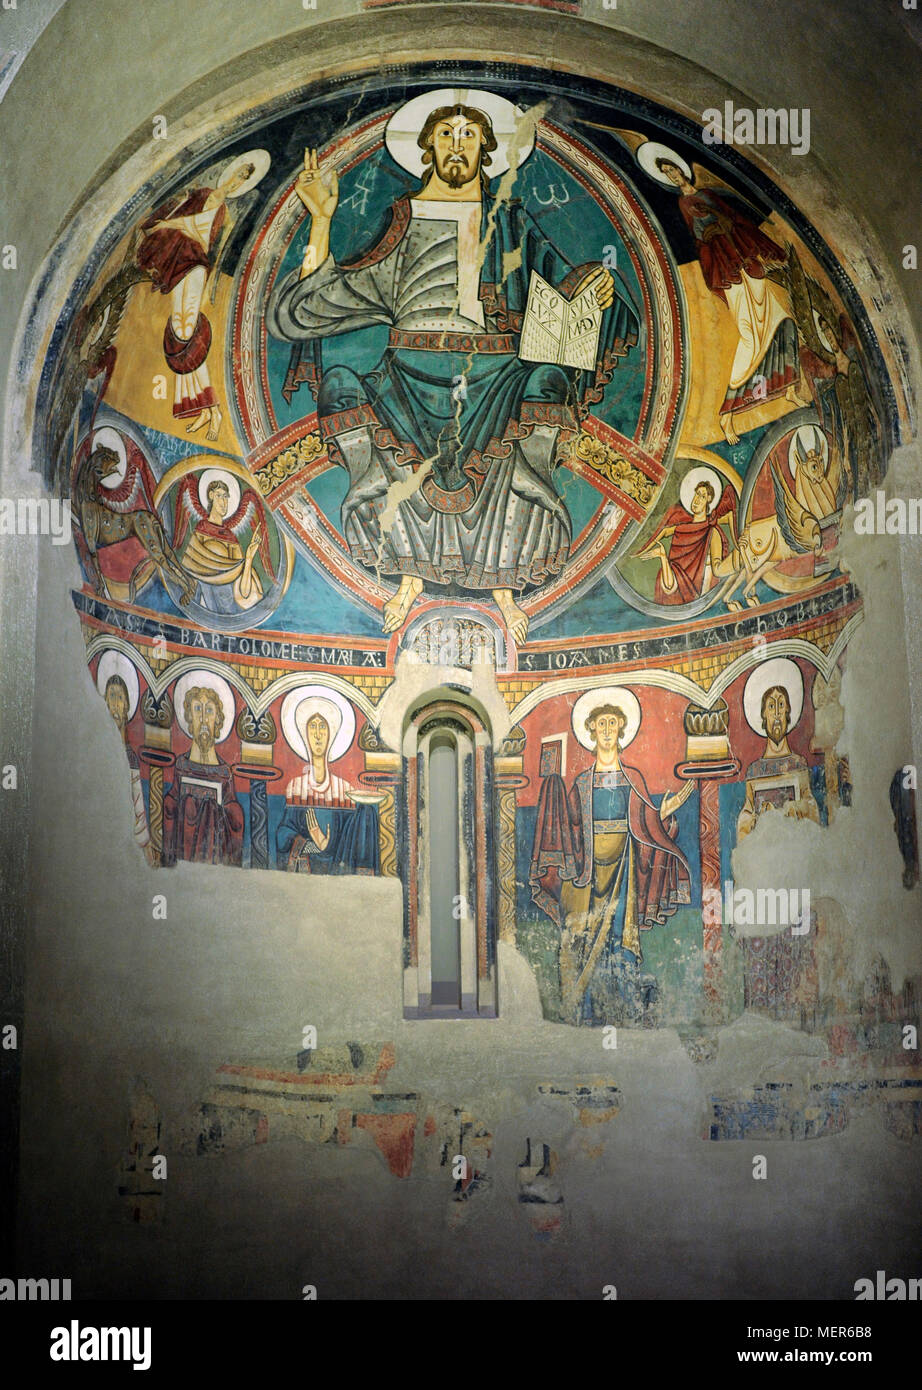 Master of Taull. Apse of Sant Climent de Taull, 1123. Romanesque. Fresco depicting Christ in Majesty in the mandorla and the Tetramorph. In the lower part, apostles and the Virgin Mary. Fresco transferred to canvas. From the Church of Sant Climent de Taull, province of Lleida. National Museum of Art of Catalonia (MNAC). Barcelona. Catalonia. Spain. Stock Photo